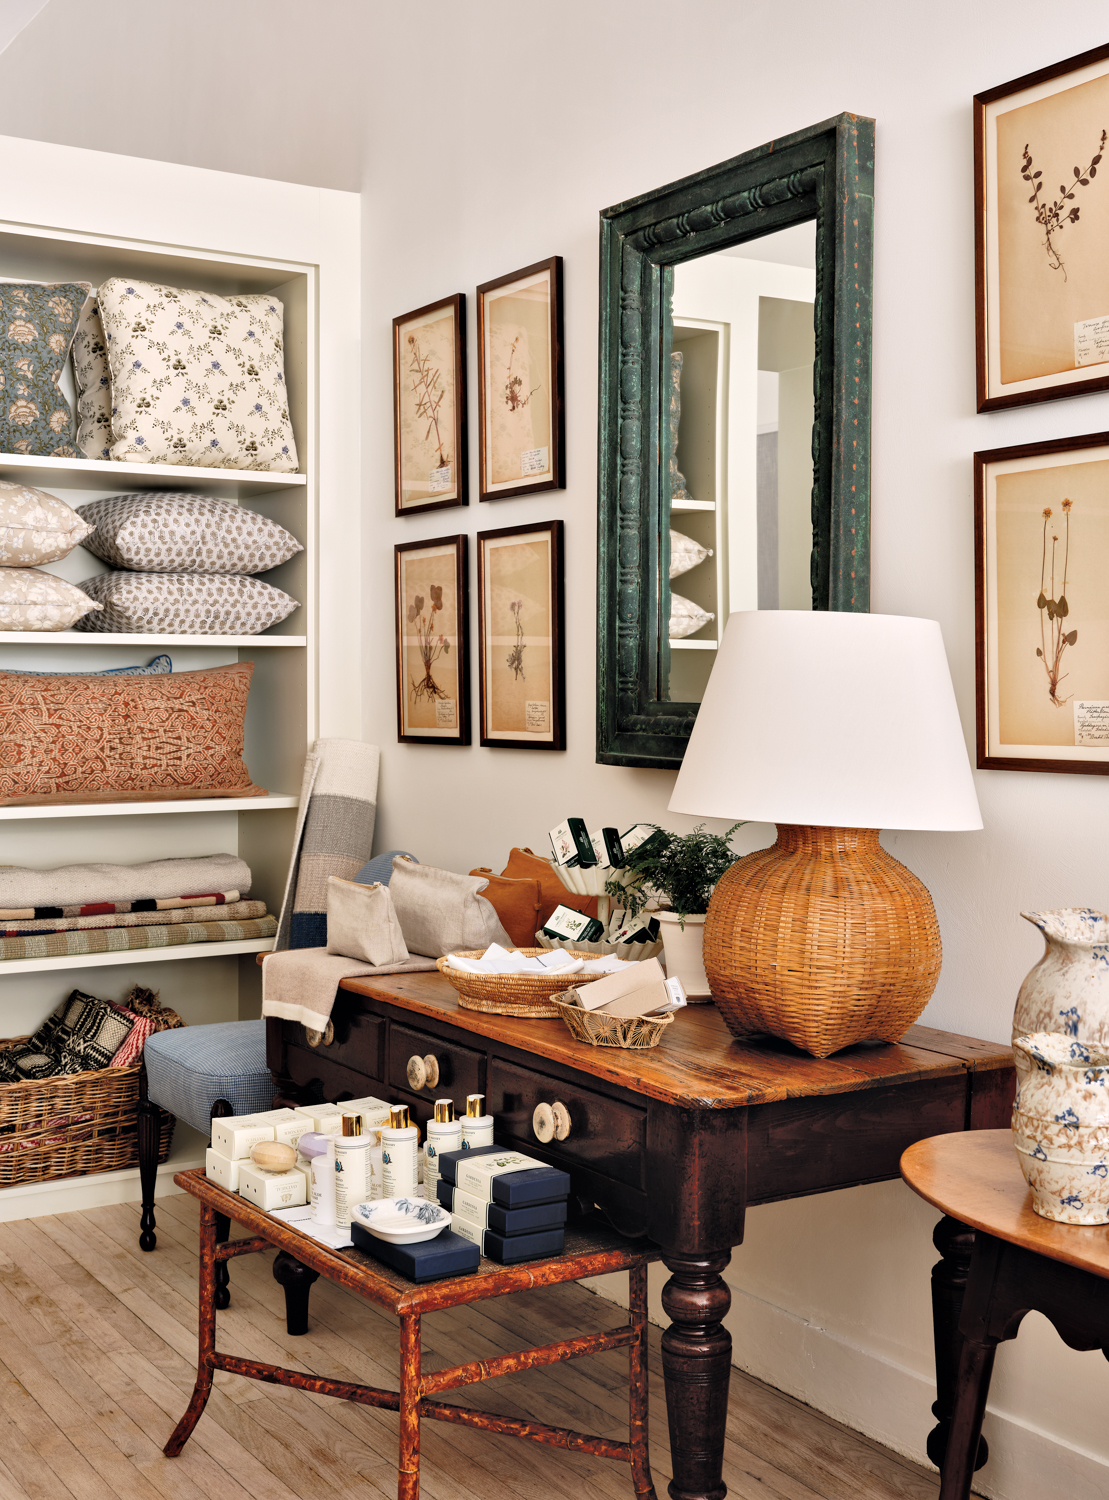 McGrath II boutique interior feature rattan table lamp, pillows on a shelves, toiletries and wall decor